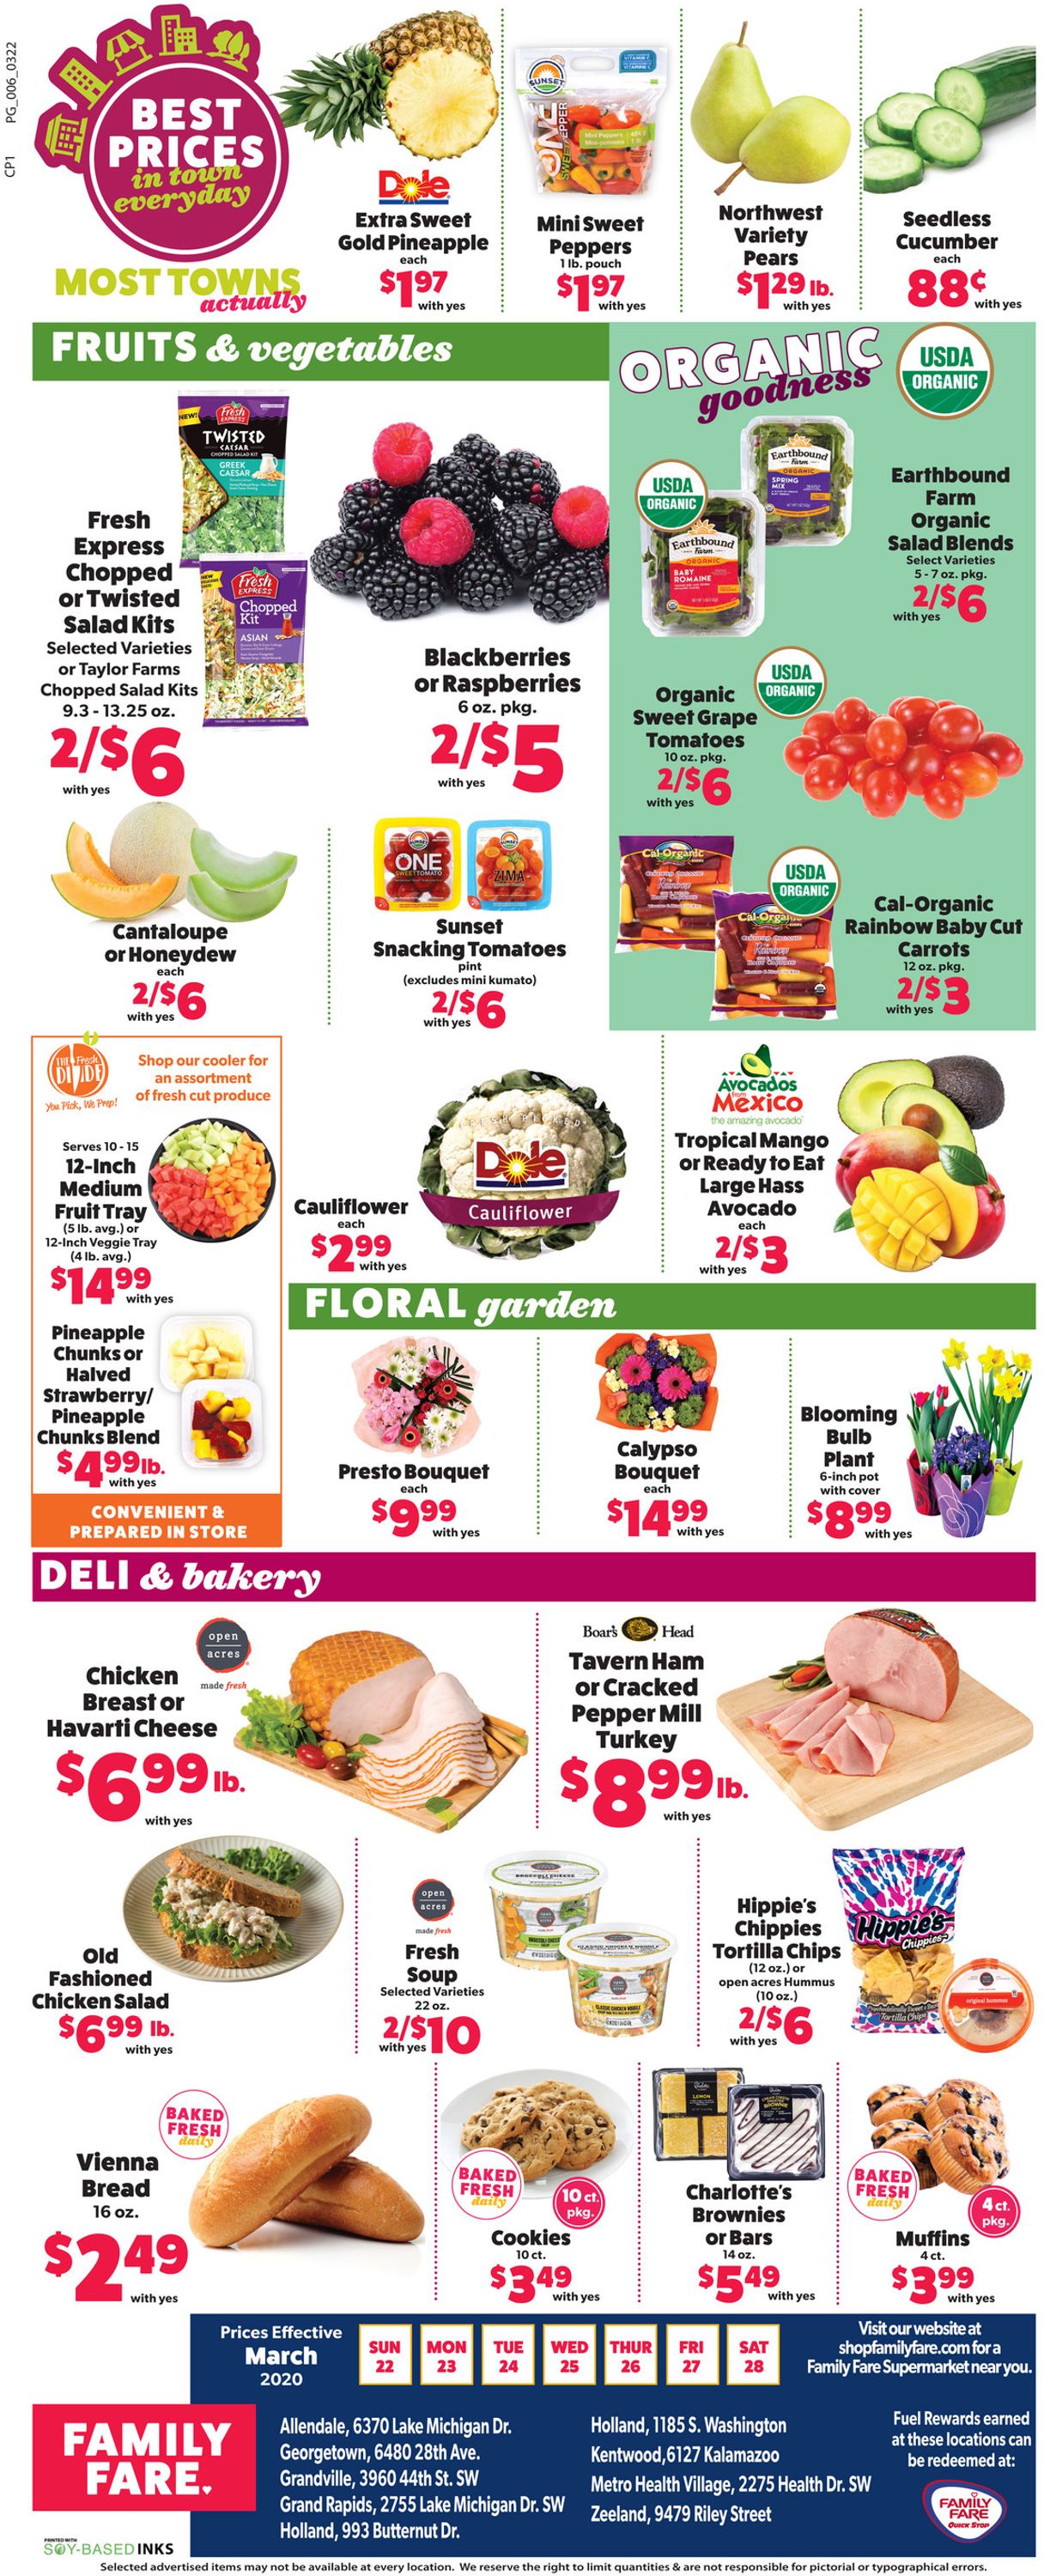 harvest fare weekly ads